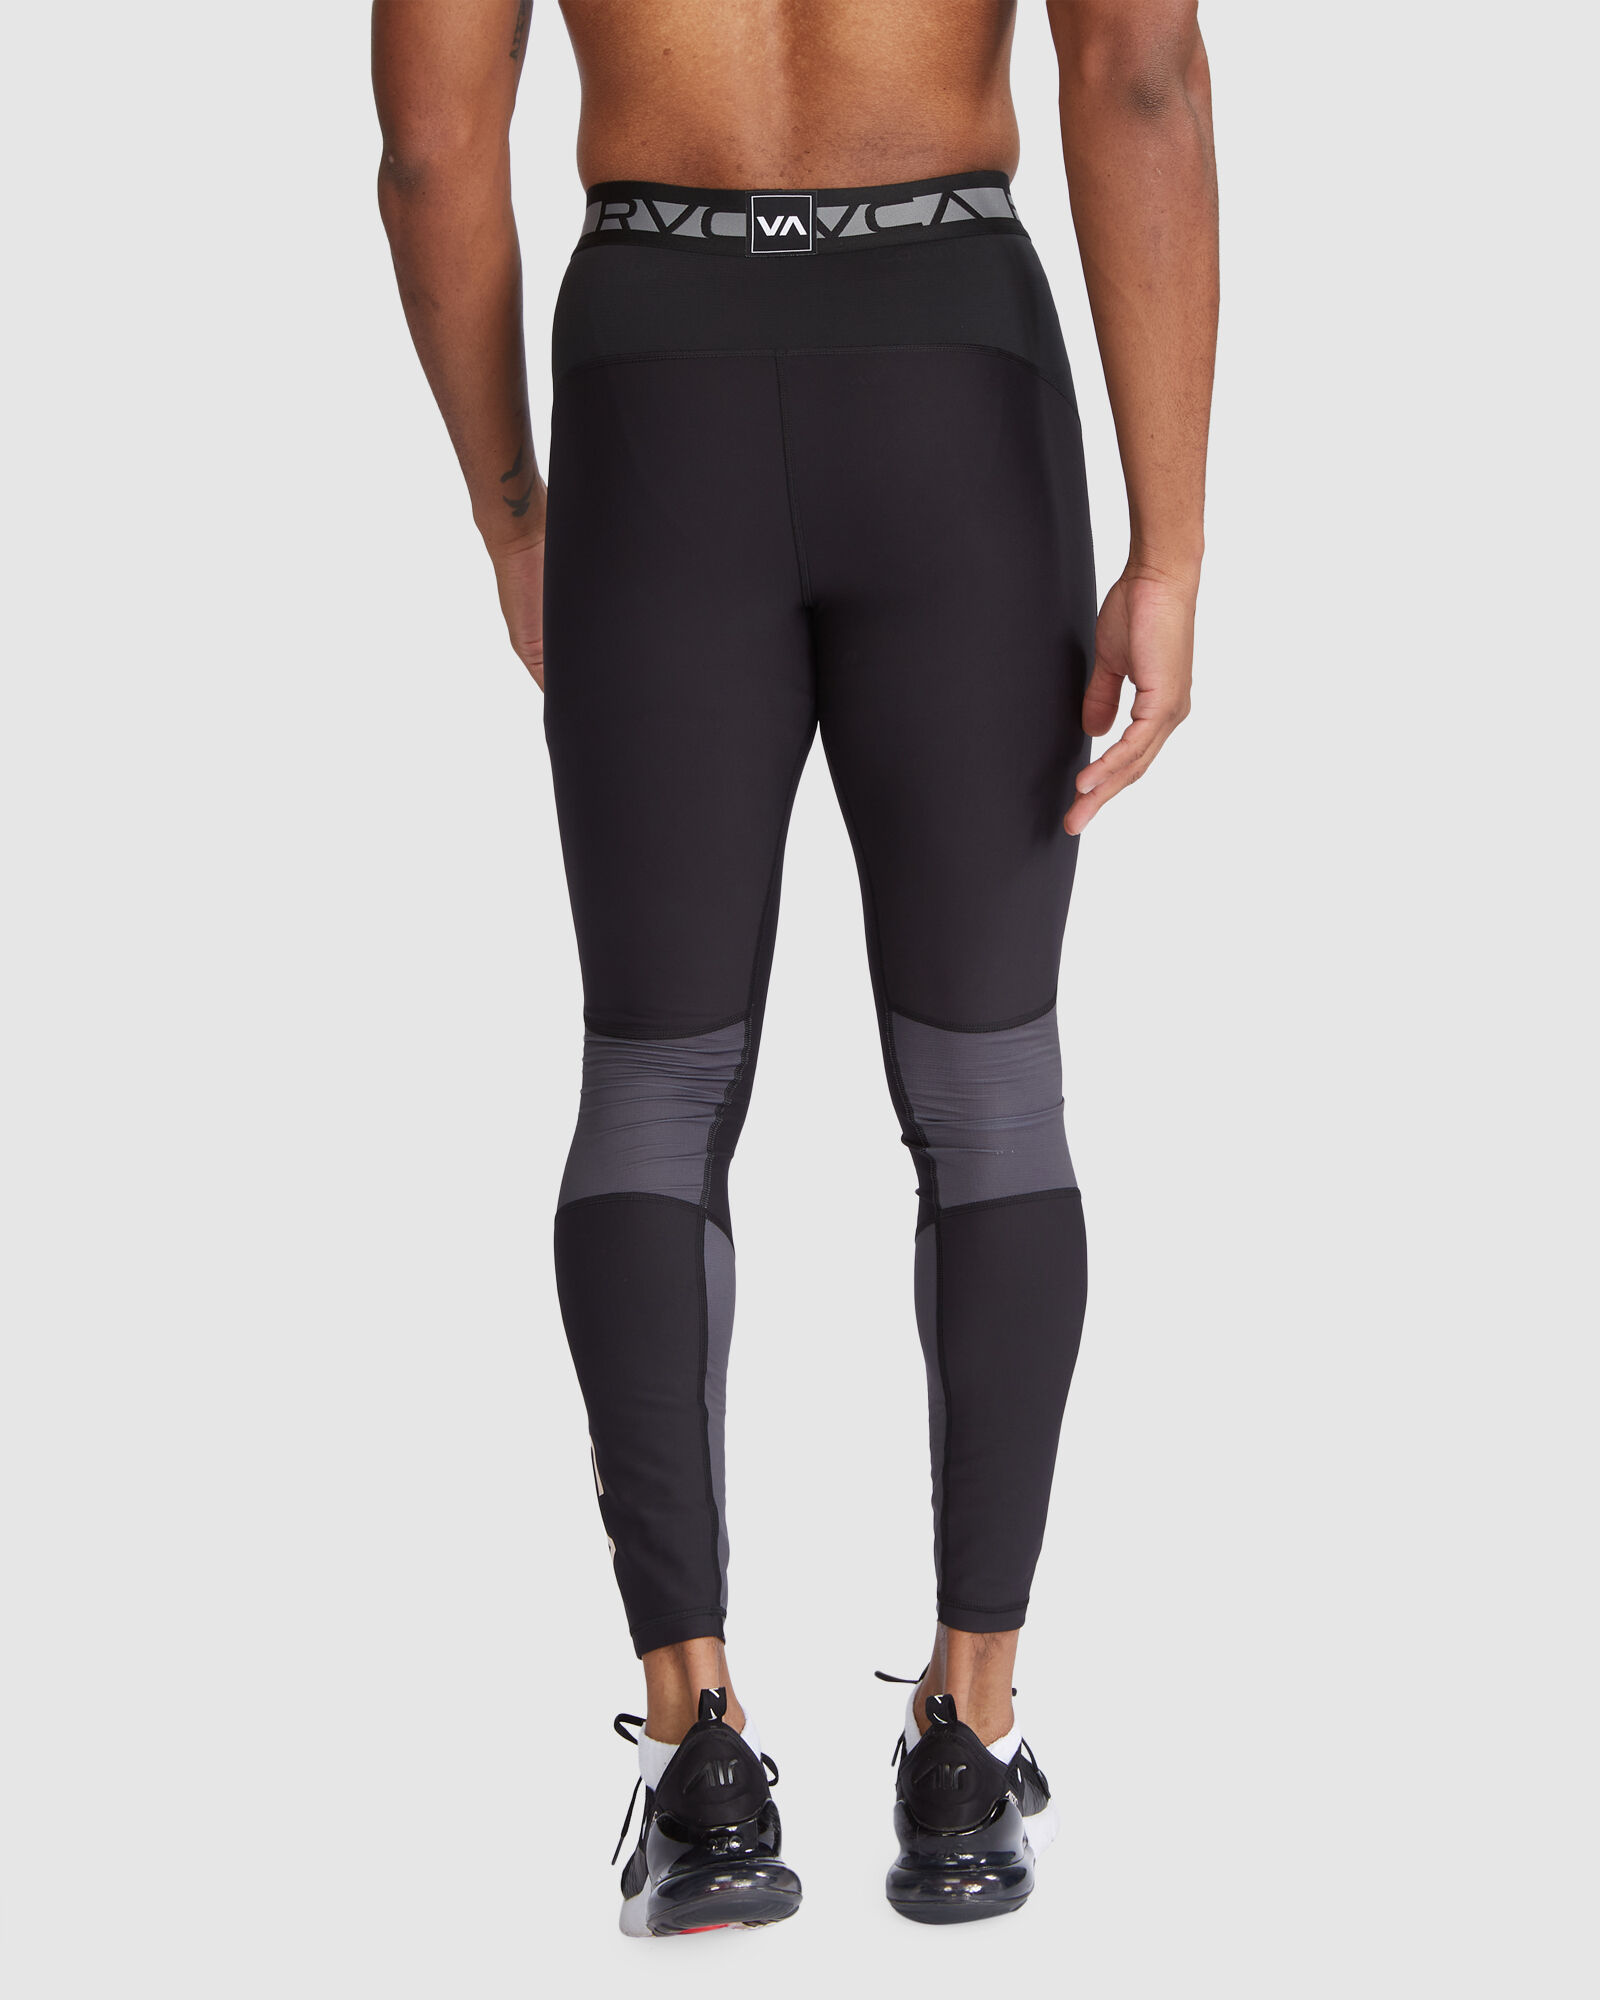 Workout Leggings For Men: Are They Right for Your Routine?